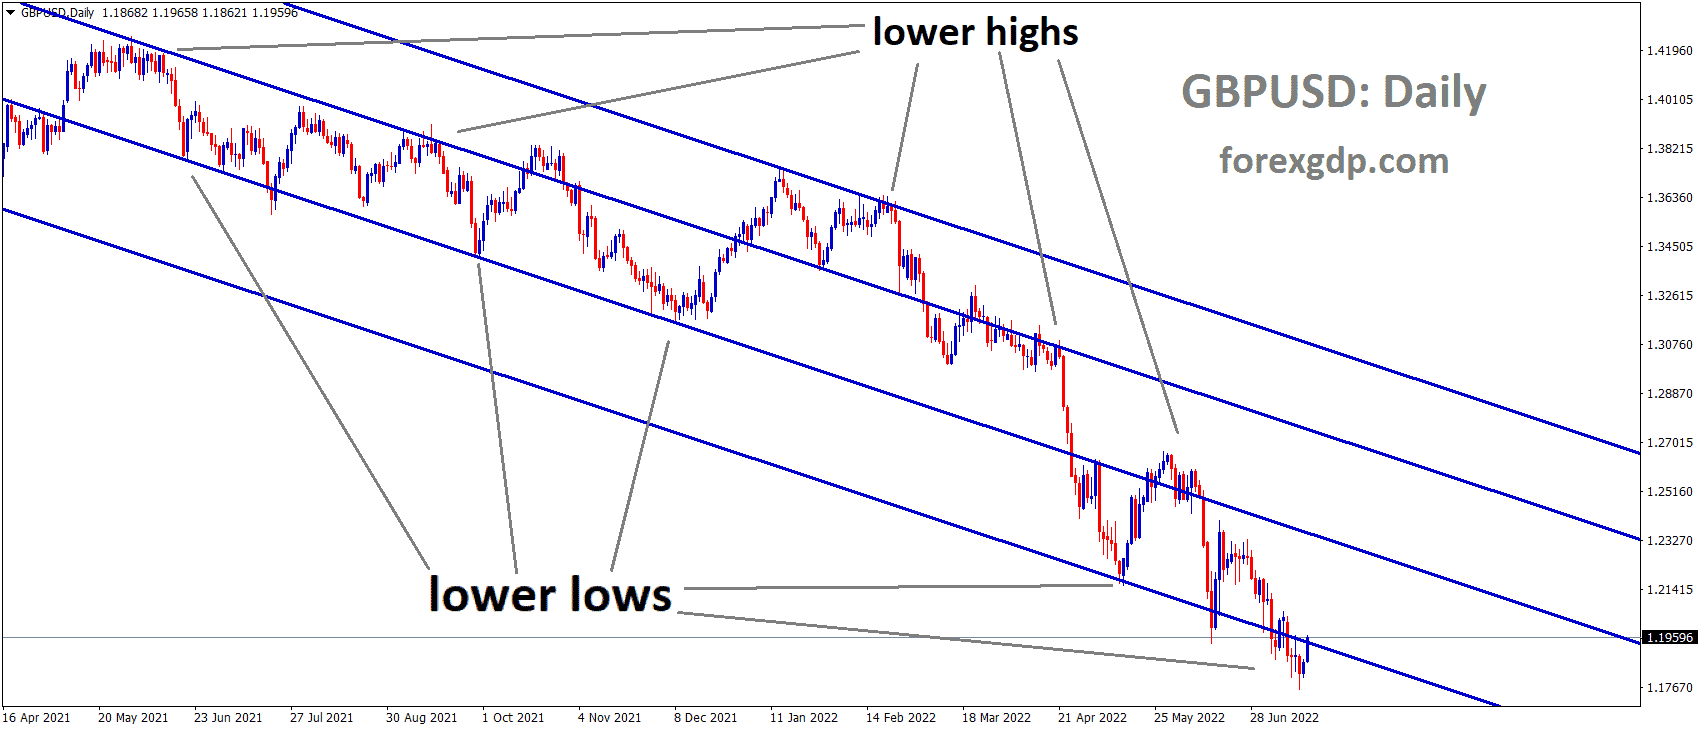 GBPUSD Daily TF Analysis Market is moving in the Descending channel and the market has rebounded from the lower low area of the channel.